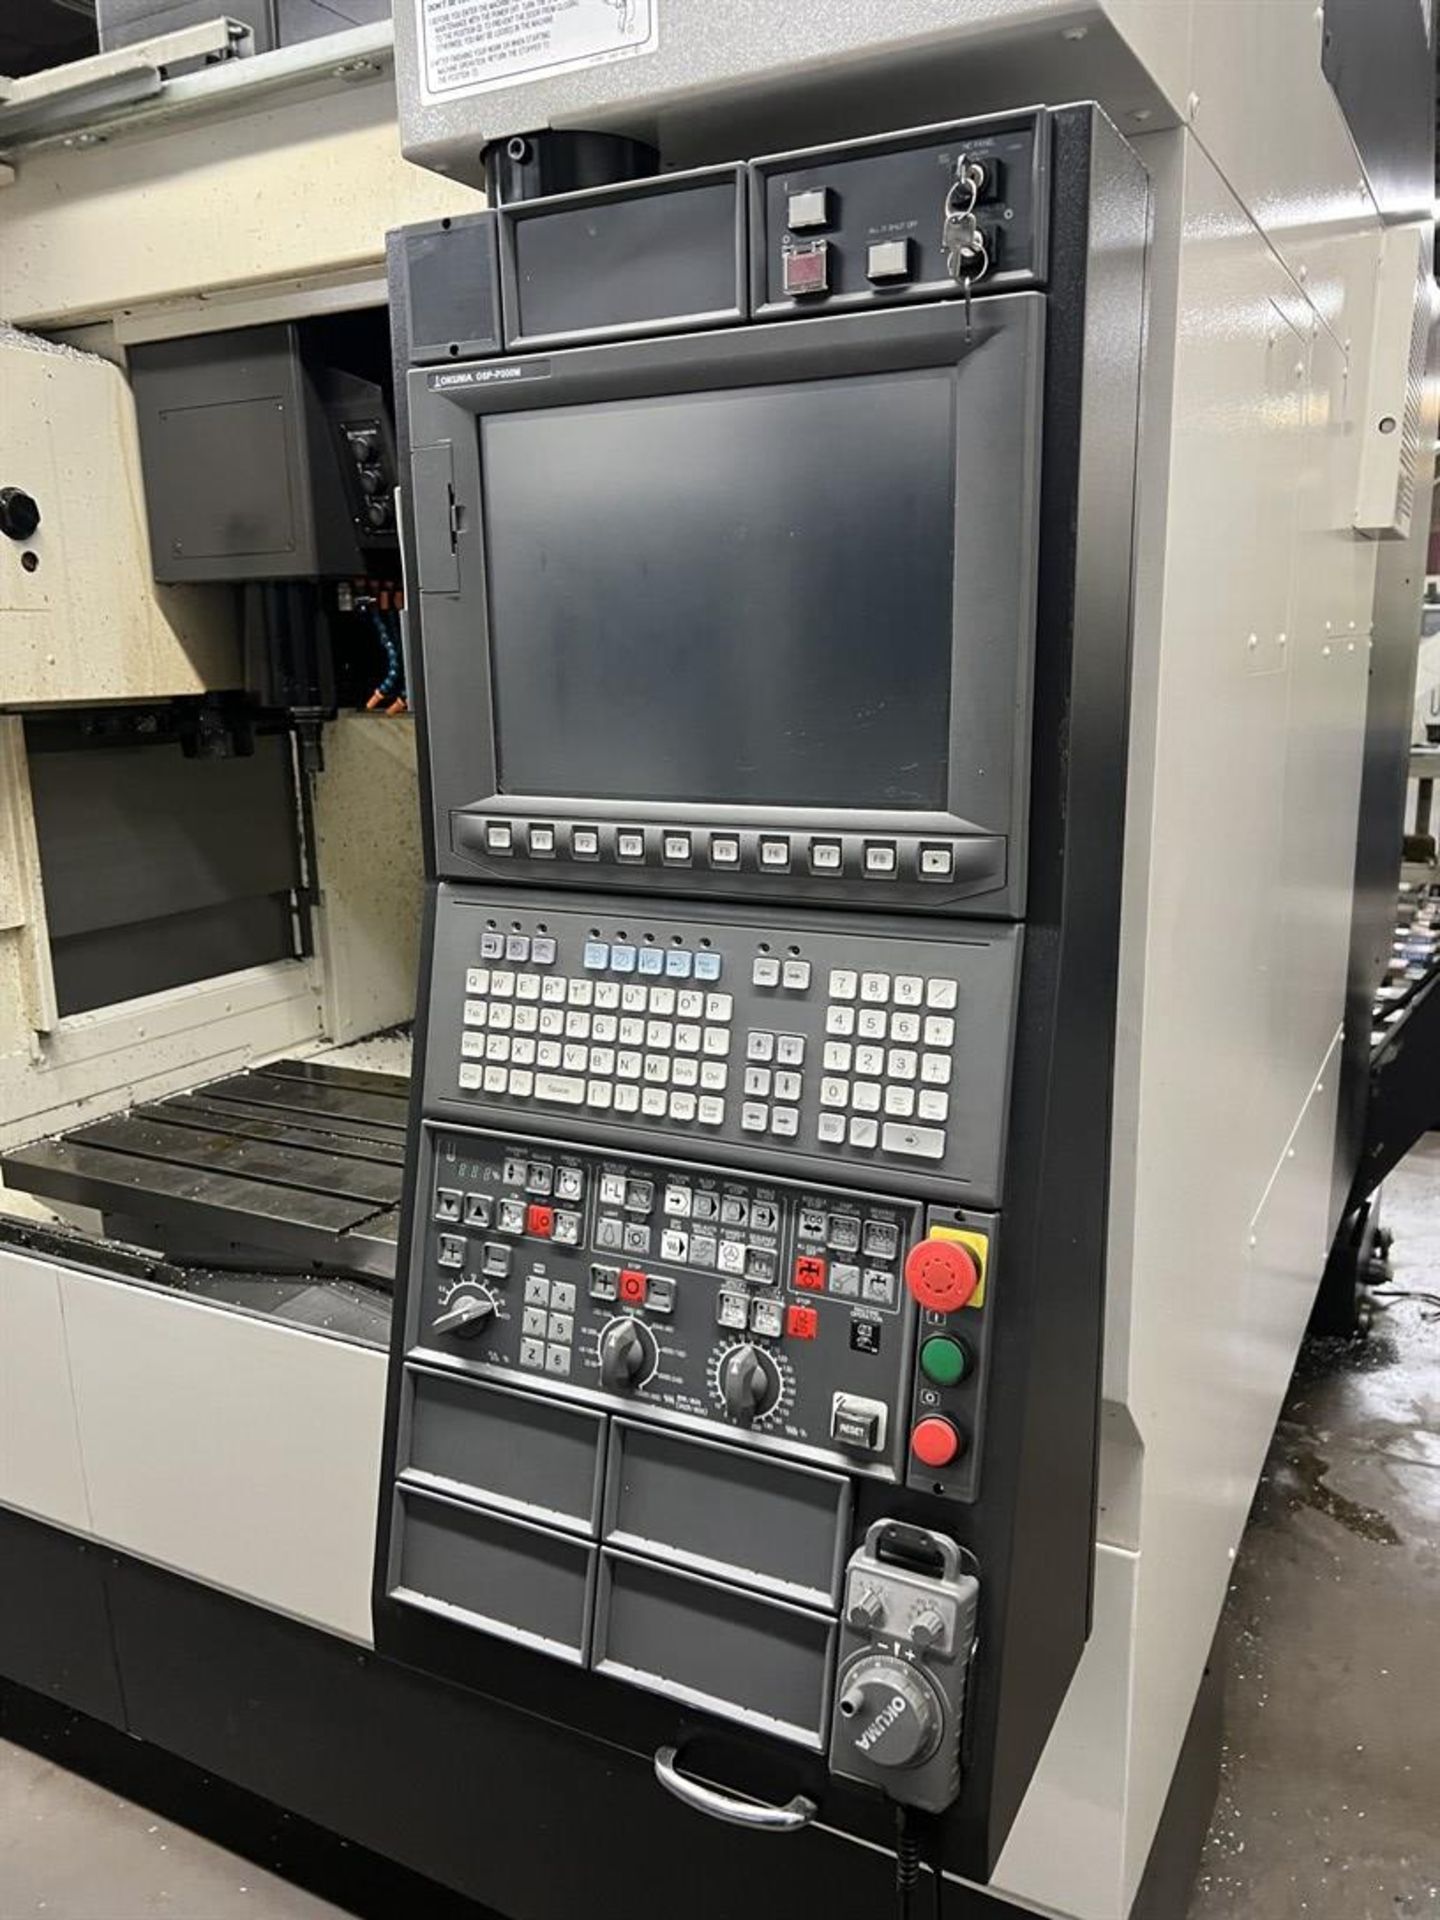 2016 OKUMA GENOS M560-V Vertical Machining Center, s/n 191946, 22” x 51” Table, CT40 Spindle - Image 4 of 11